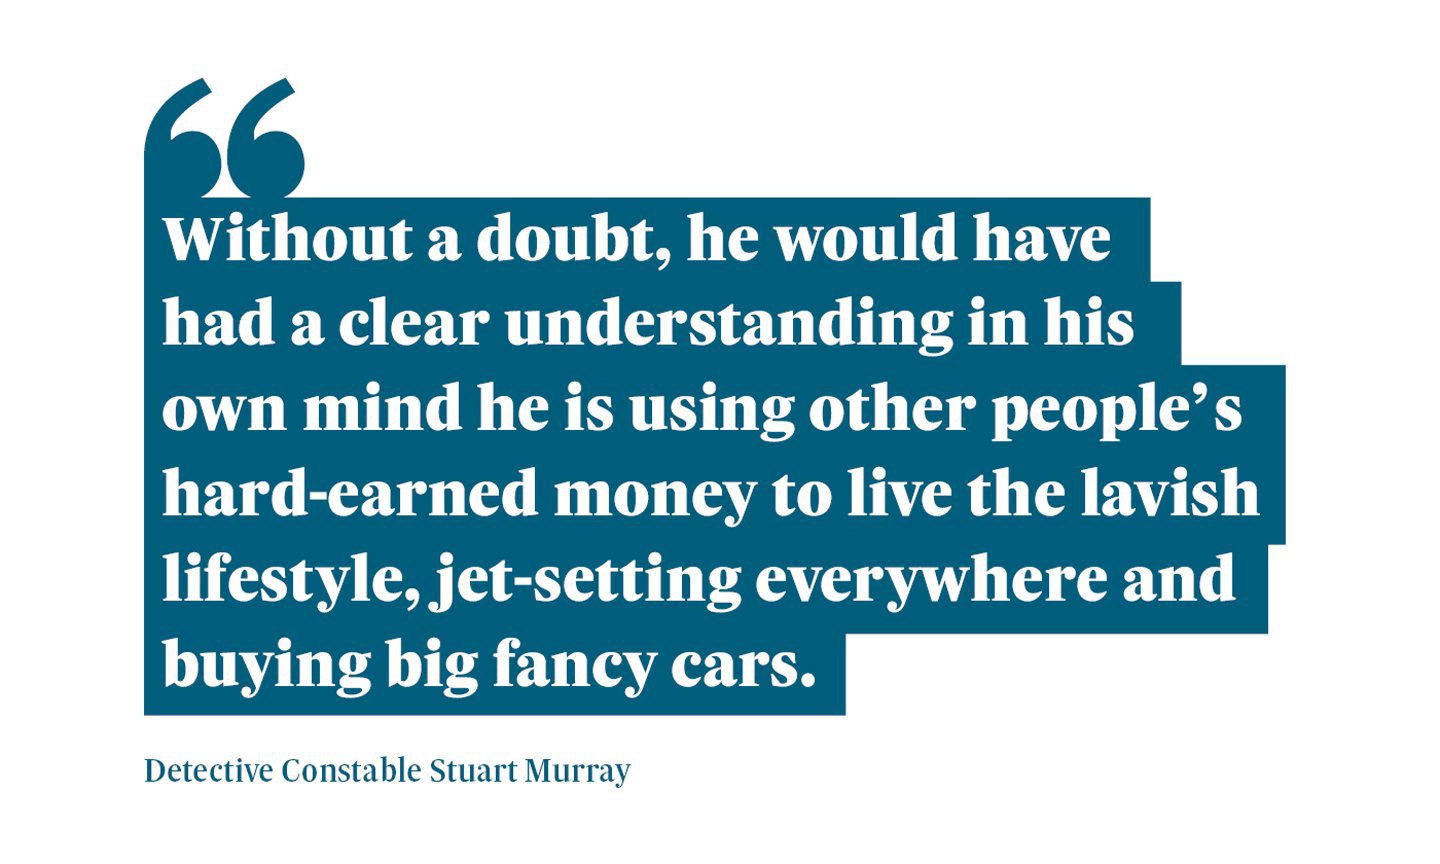 A graphic that reads: “Without a doubt, he would have had a clear understanding in his own mind he is using other people’s hard-earned money to live the lavish lifestyle, jet-setting everywhere and buying big fancy cars." A quote from Detective Constable Stuart Murray.